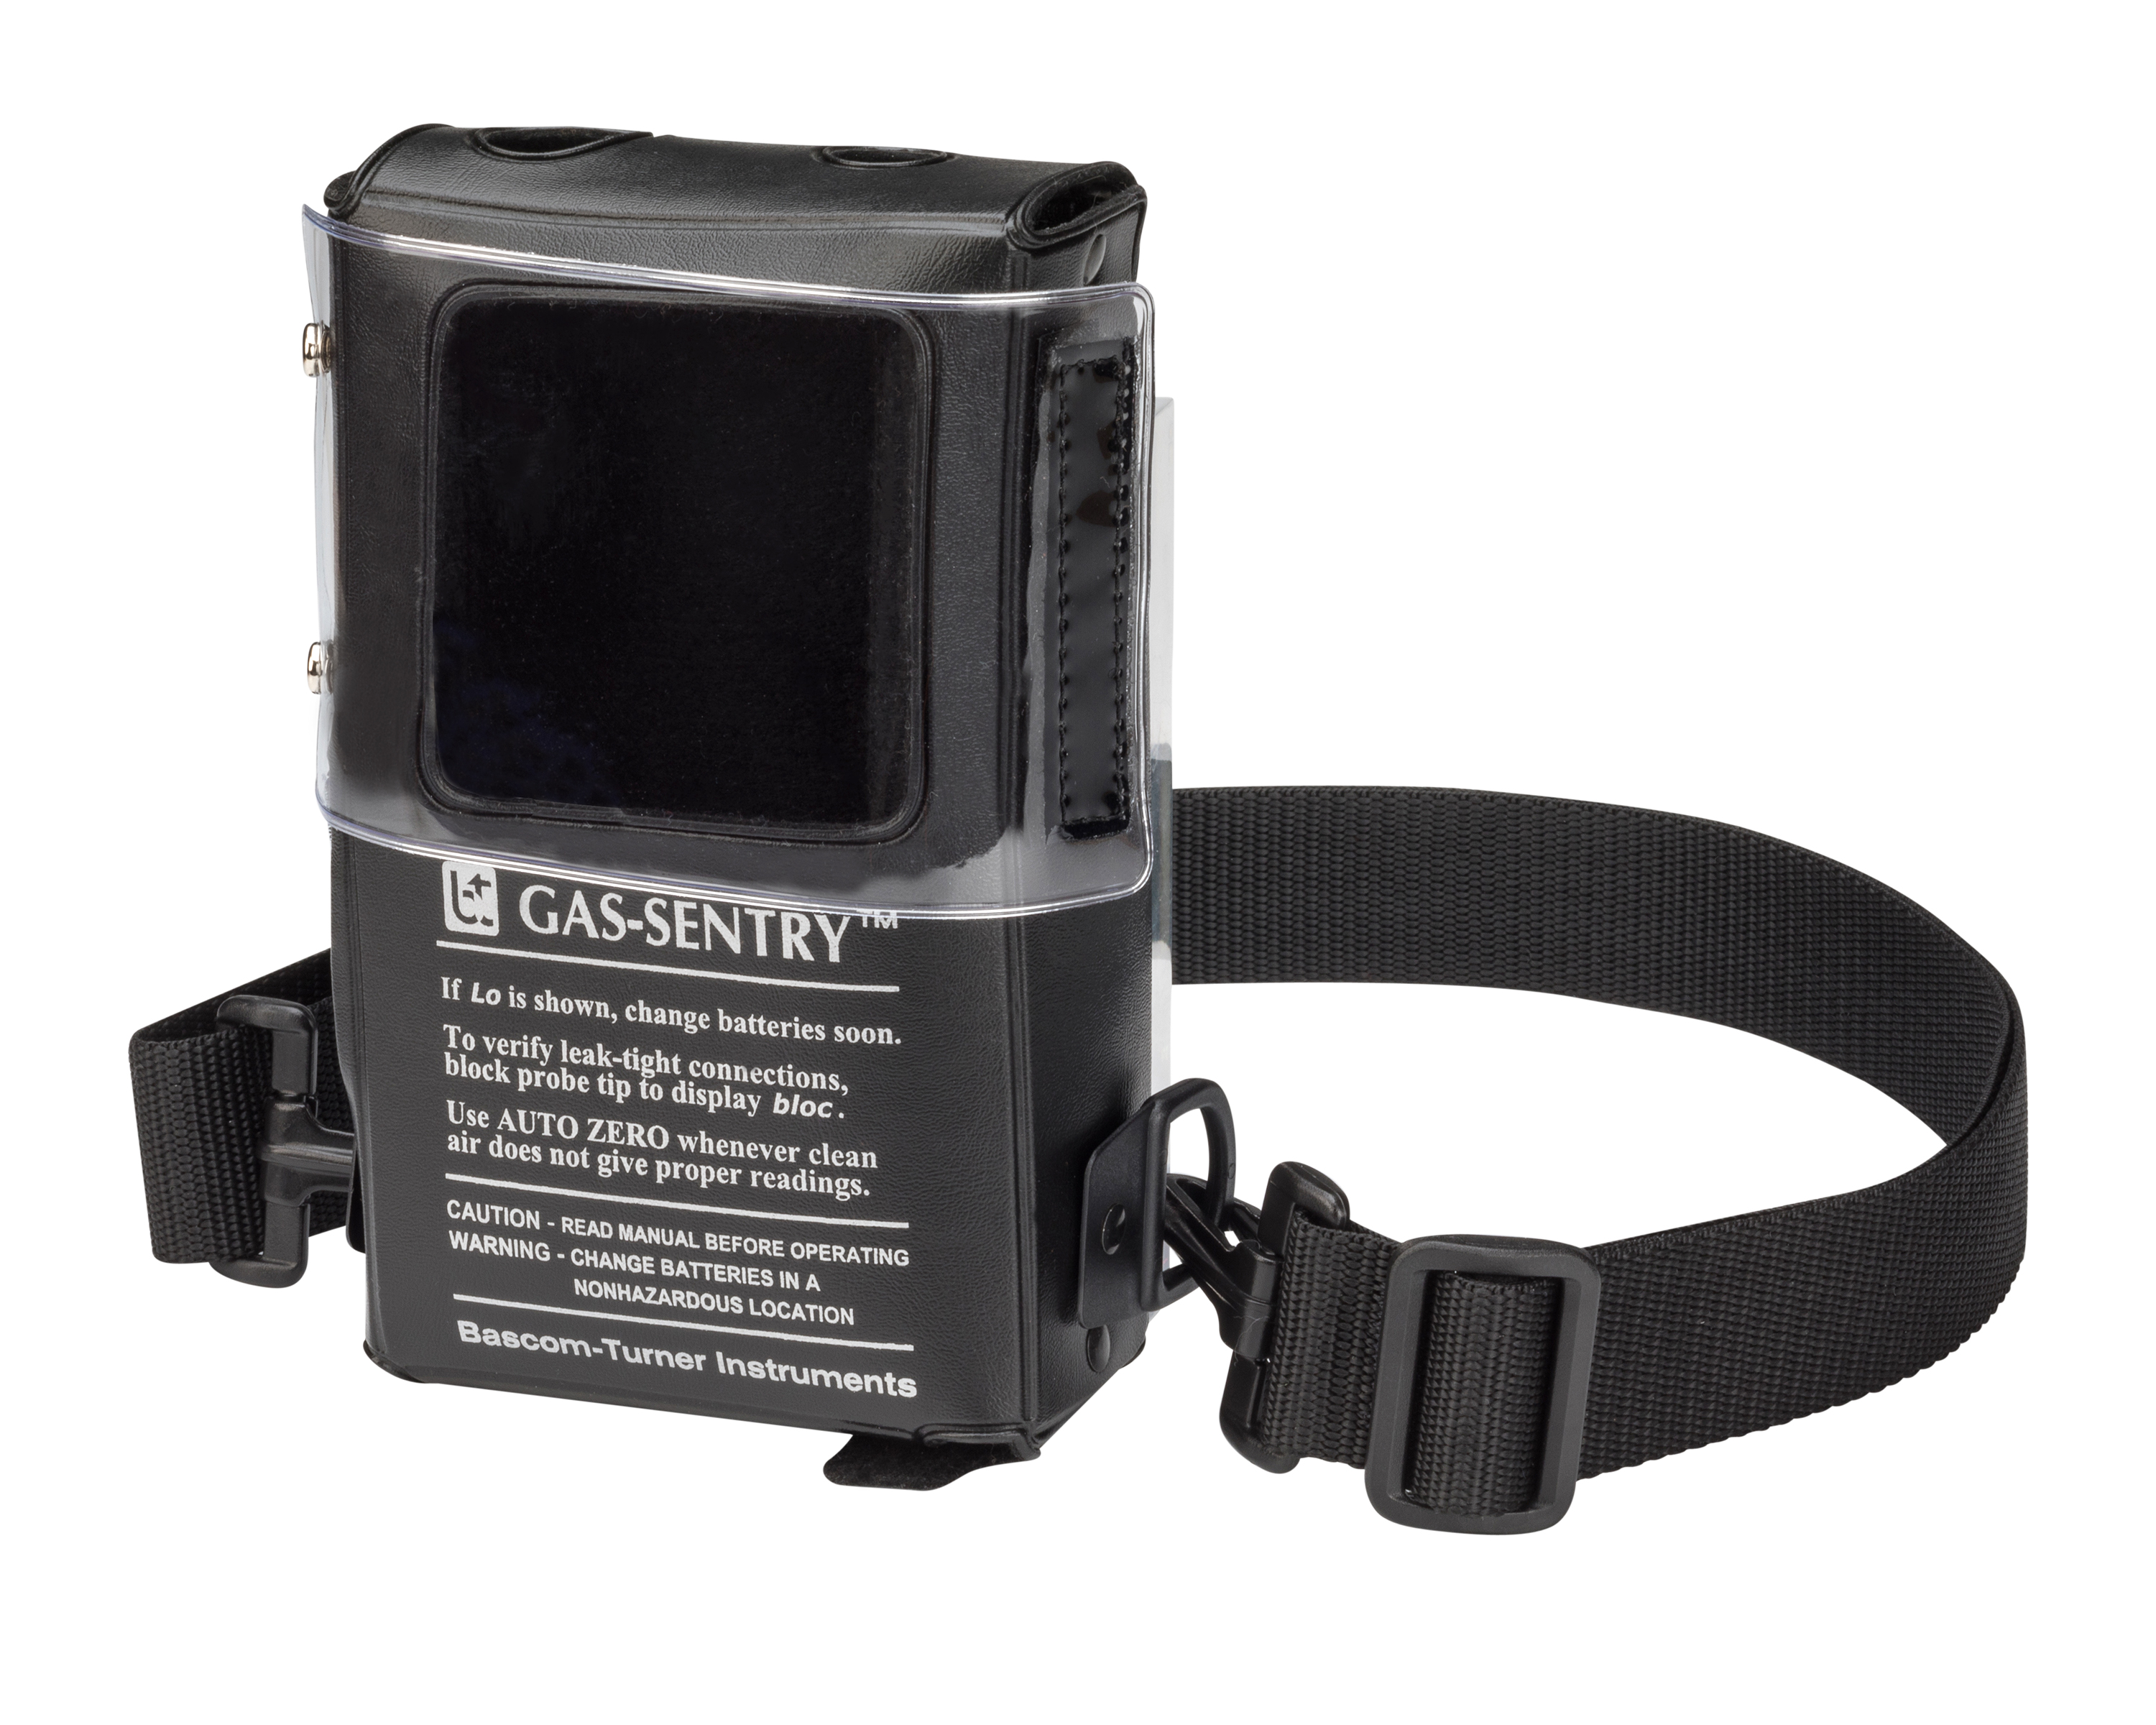 CC-001 Leatherette Carryall for Gas-Sentry